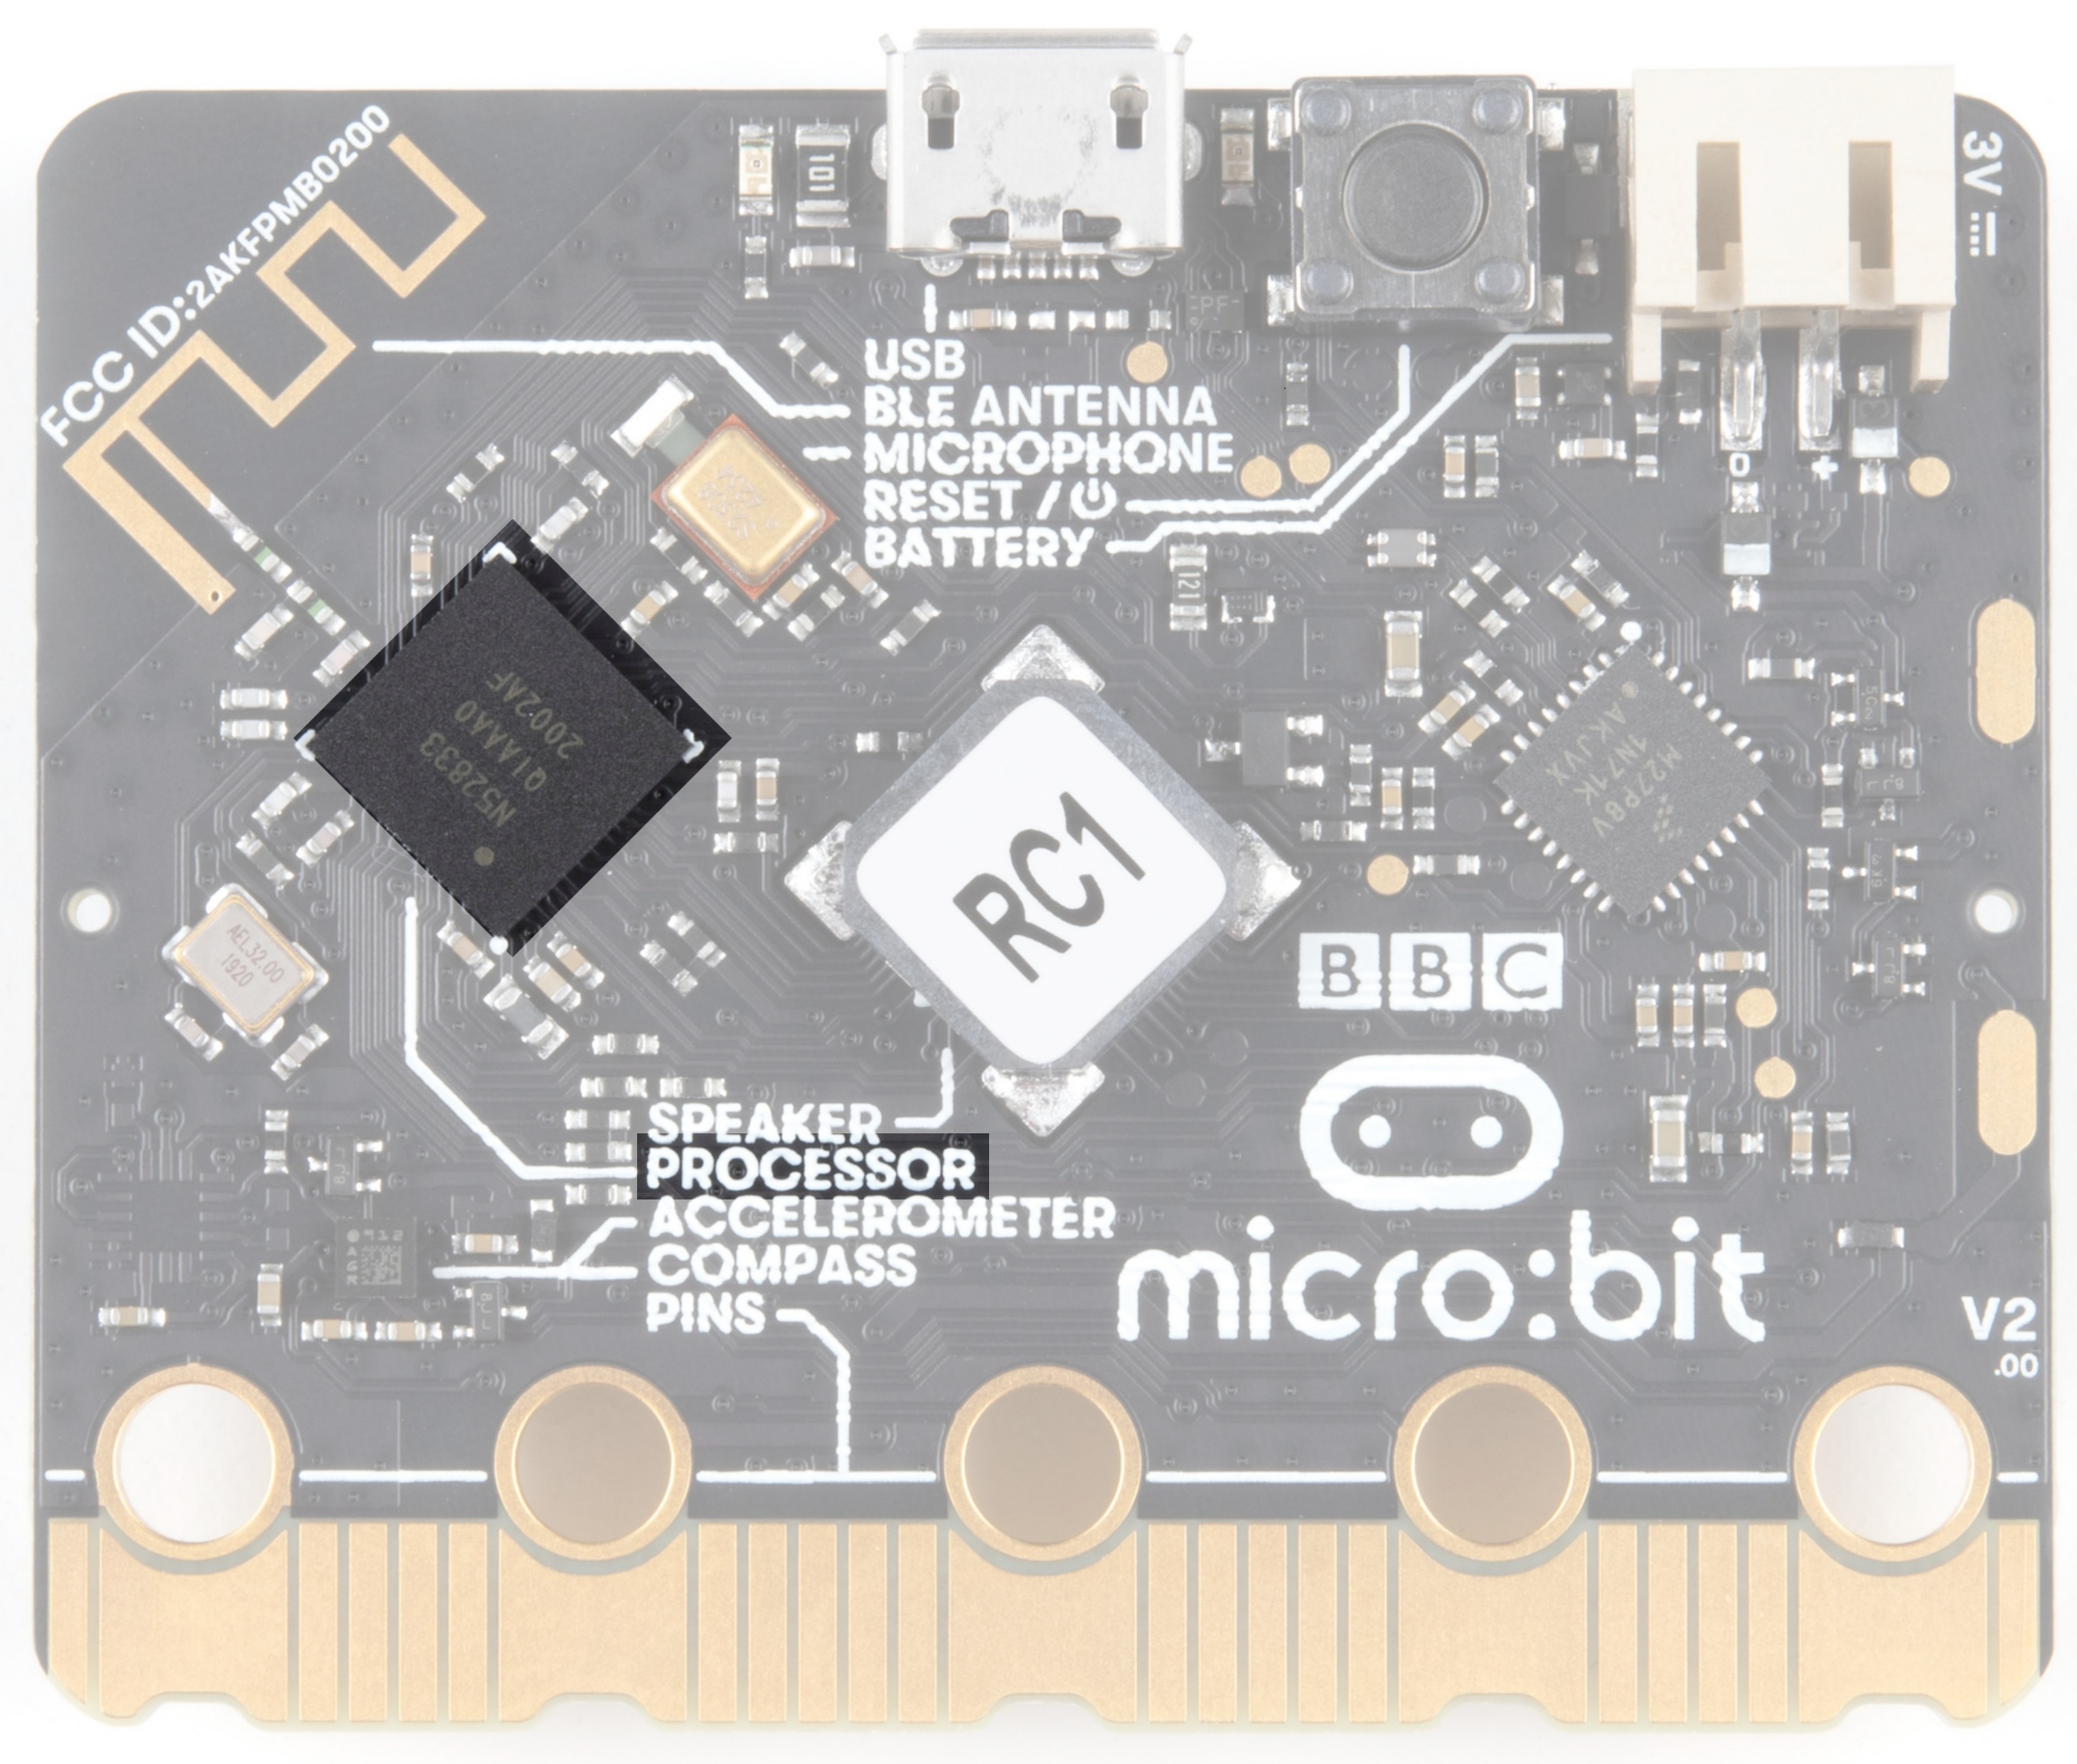 Getting Started with the micro:bit - SparkFun Learn